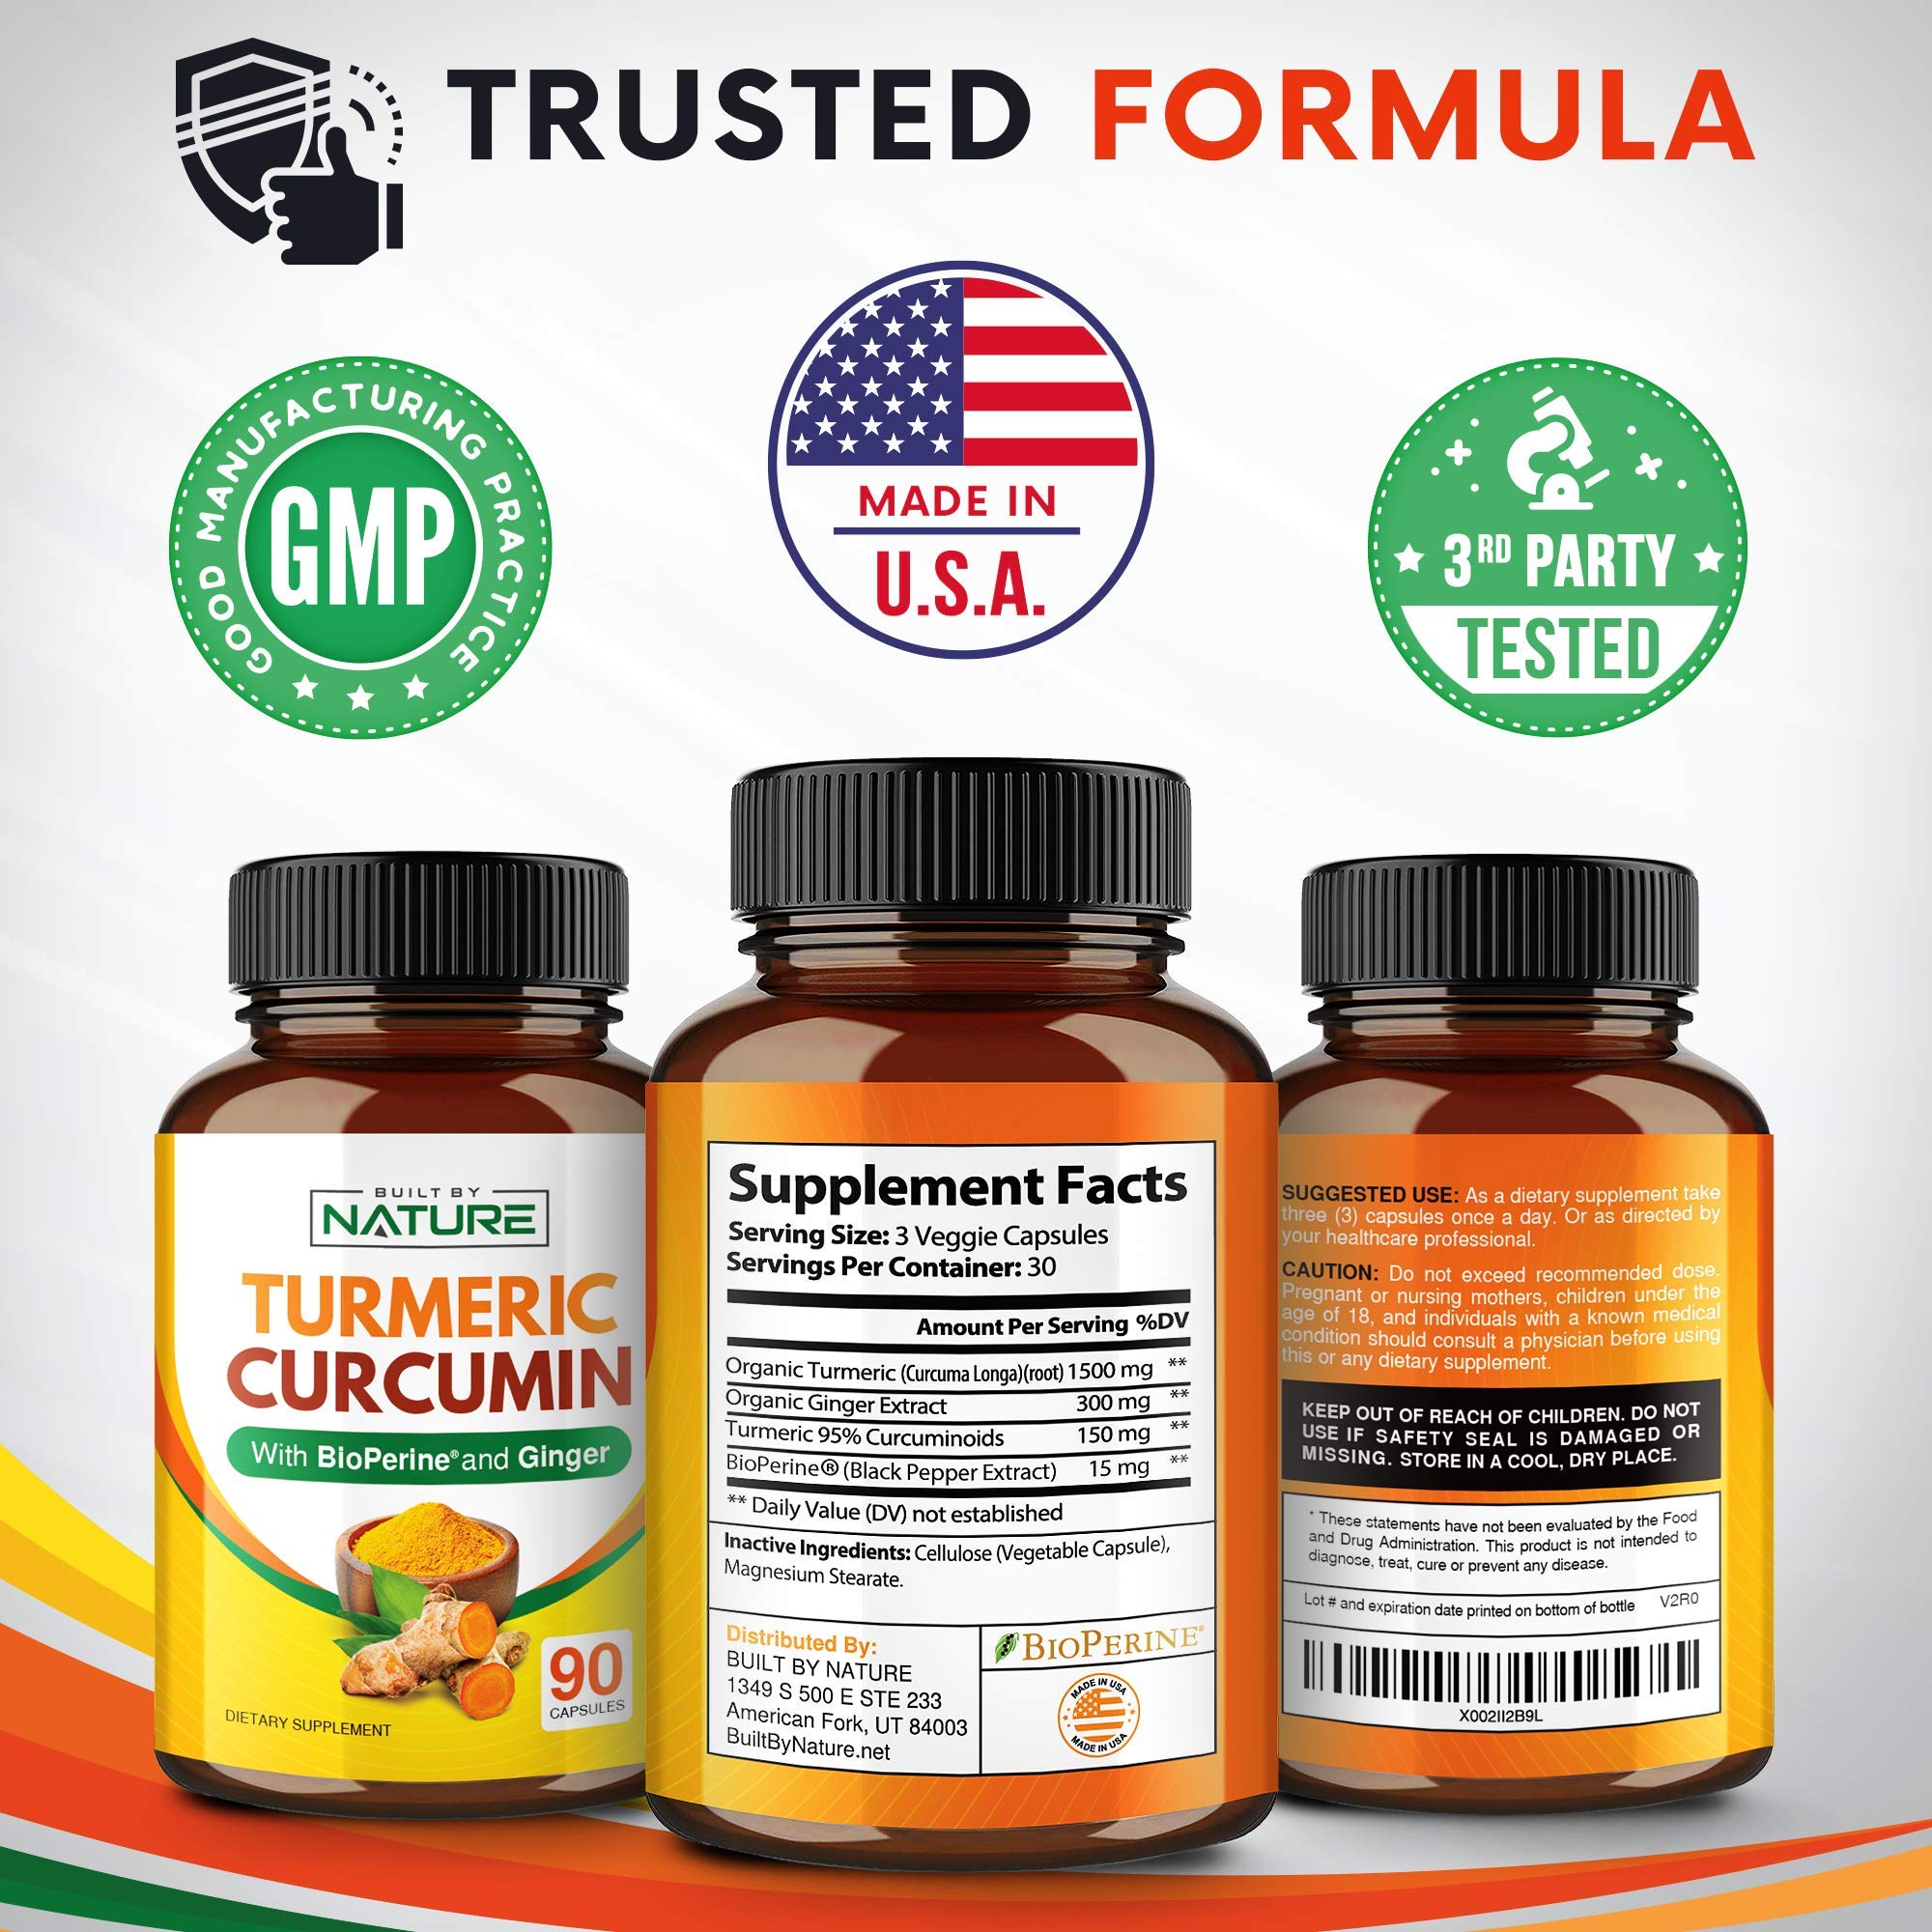 Turmeric Curcumin 1965mg with BioPerine & Ginger, Extra Strength 95% Curcuminoids - Black Pepper for Max Absorption, Natural Joint & Antioxidant, Non-GMO, Vegan Gluten Free Supplement, 90 Capsules